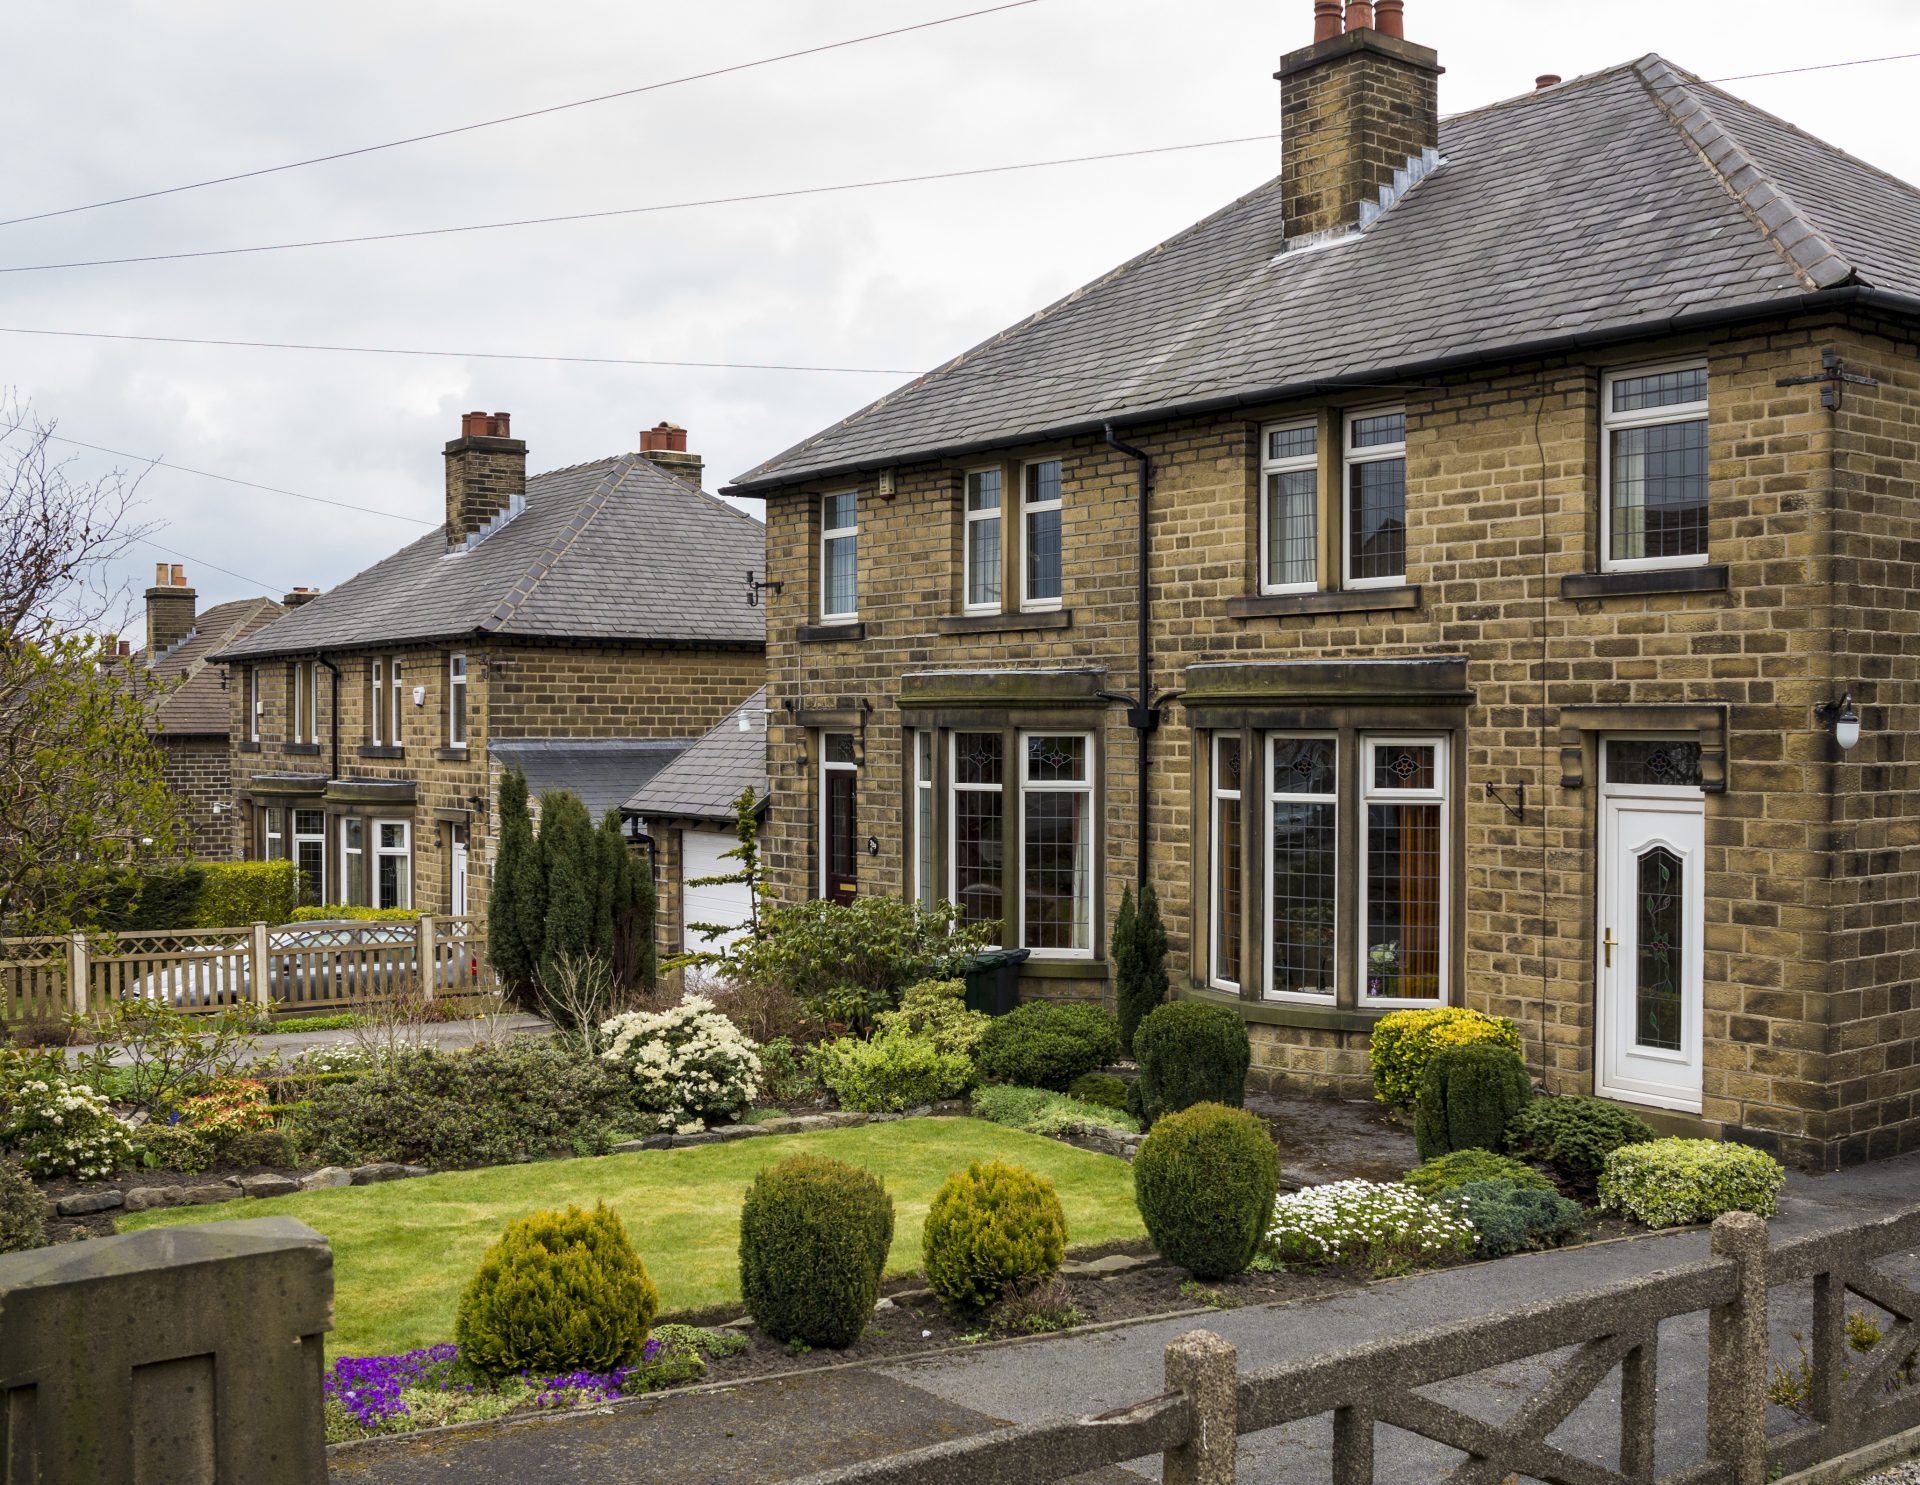 Property Investment Opportunities for First-Time Buyers in West Yorkshire